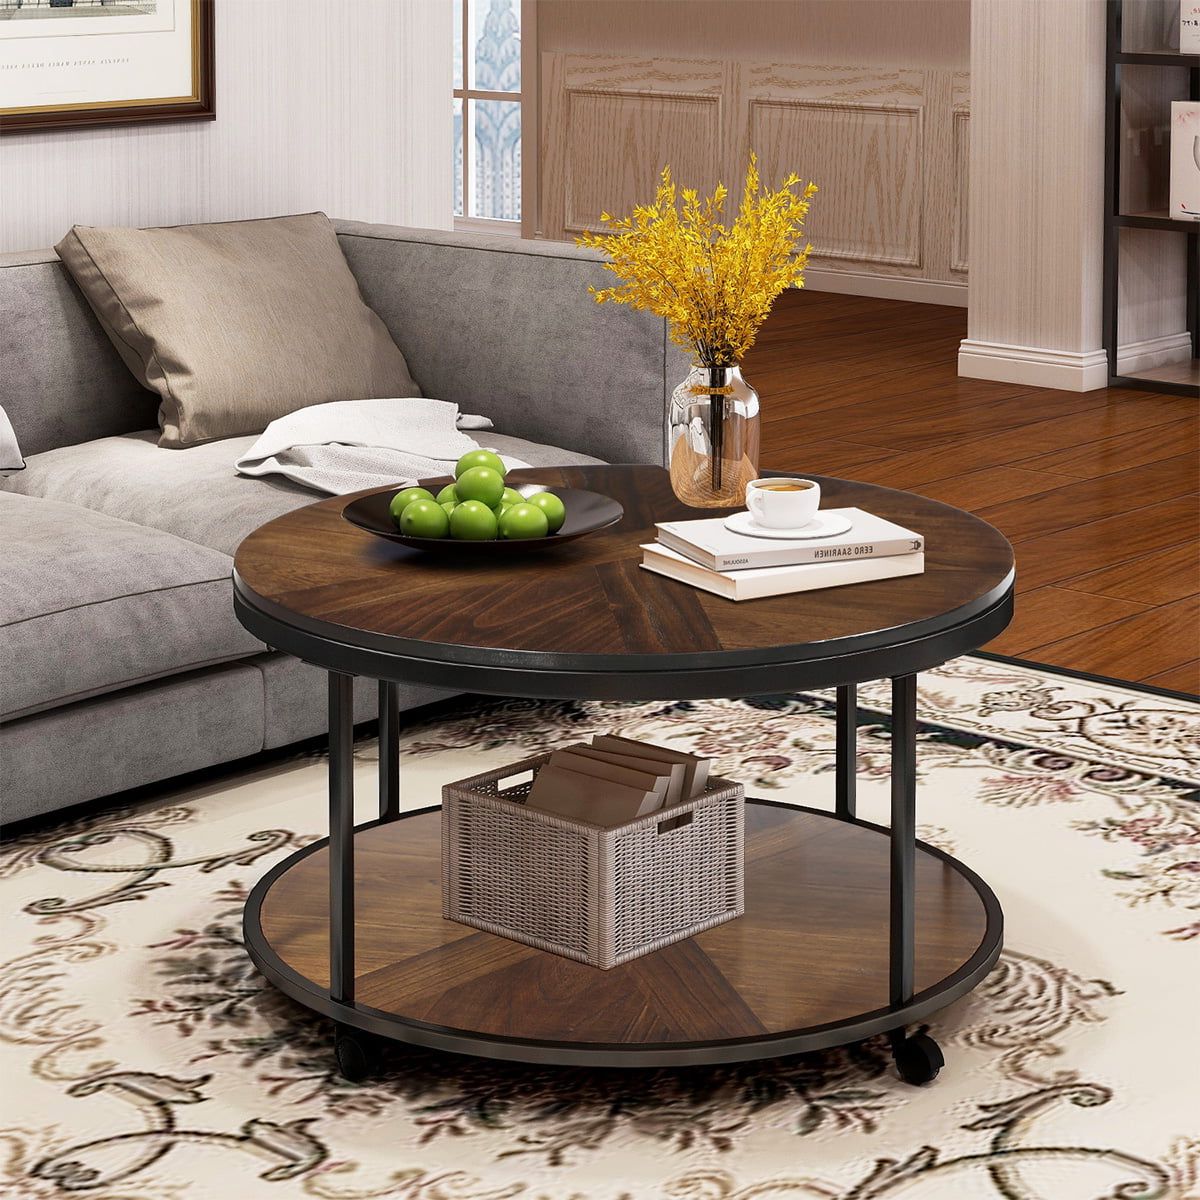 Sentern Round Coffee Table With Caster Wheels And Unique Textured Pertaining To Best And Newest Round Coffee Tables (View 4 of 15)